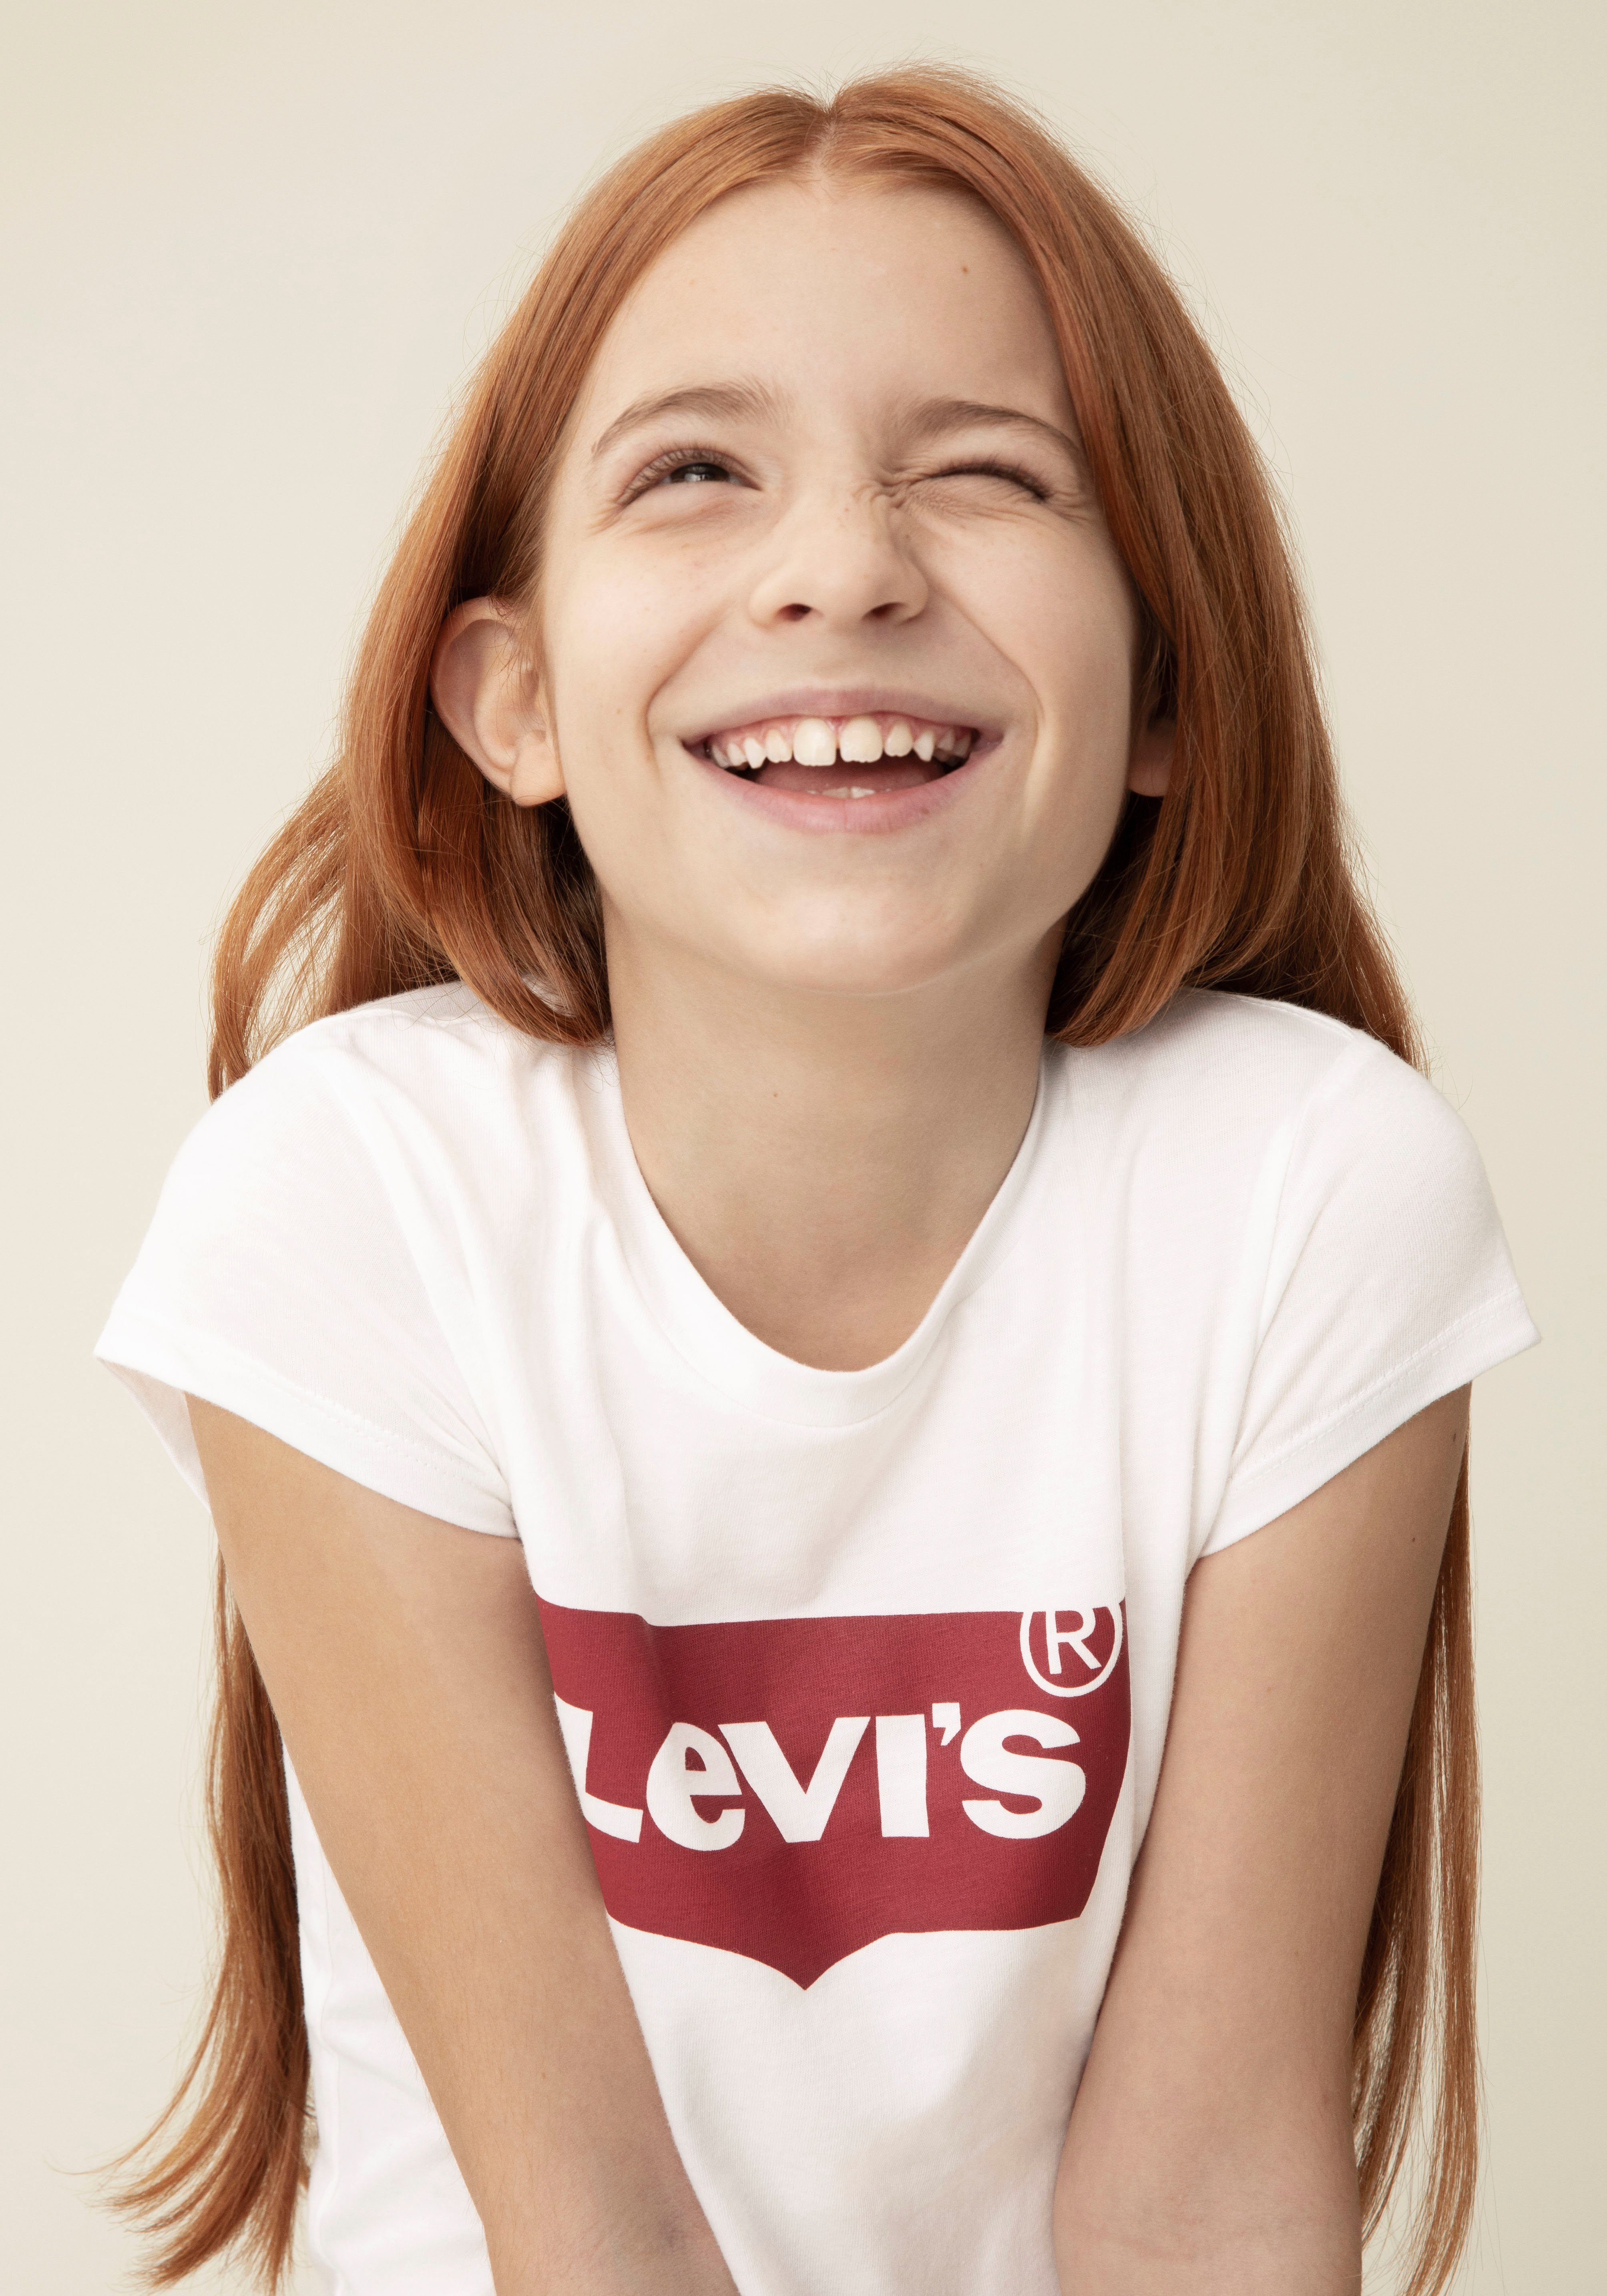 BATWING GIRLS Kids white/red for TEE Levi's® T-Shirt